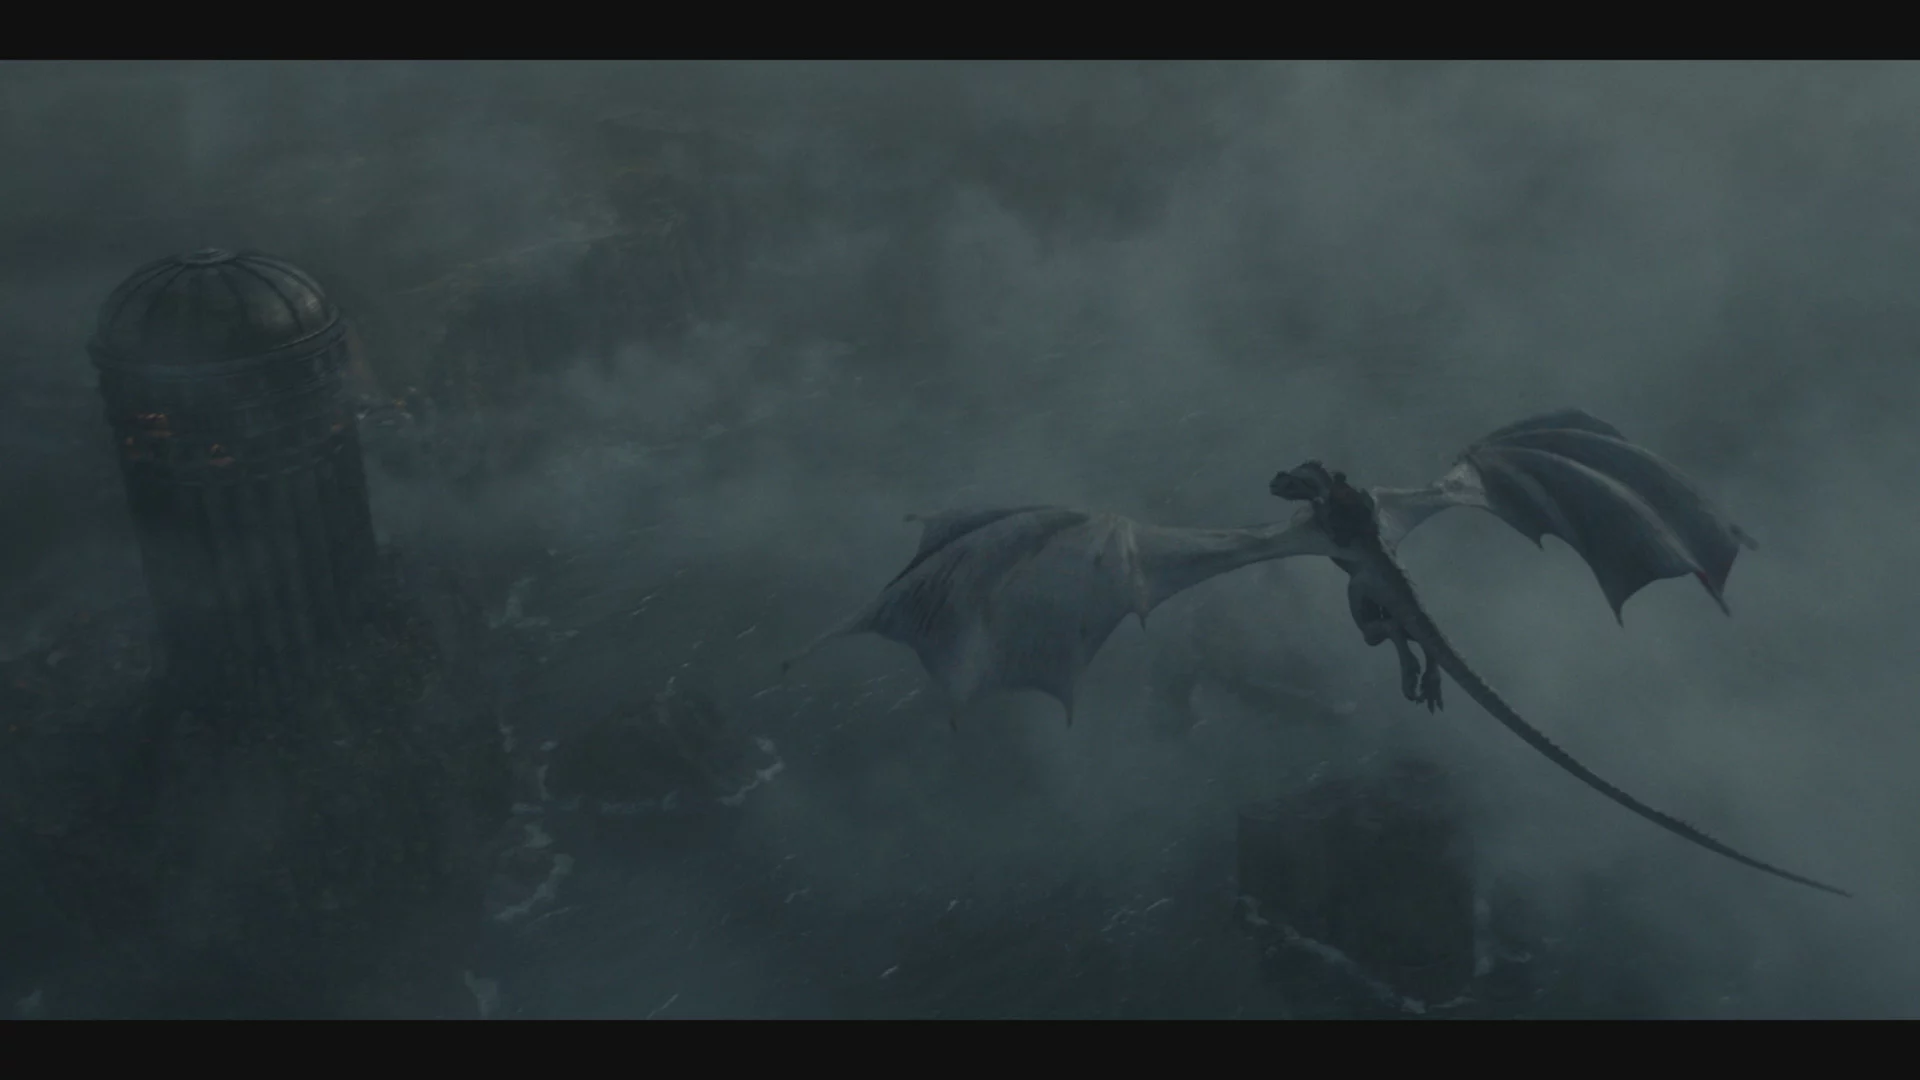 A dragon flies over the clouds setting an ominous tone in house of the dragons episode 10